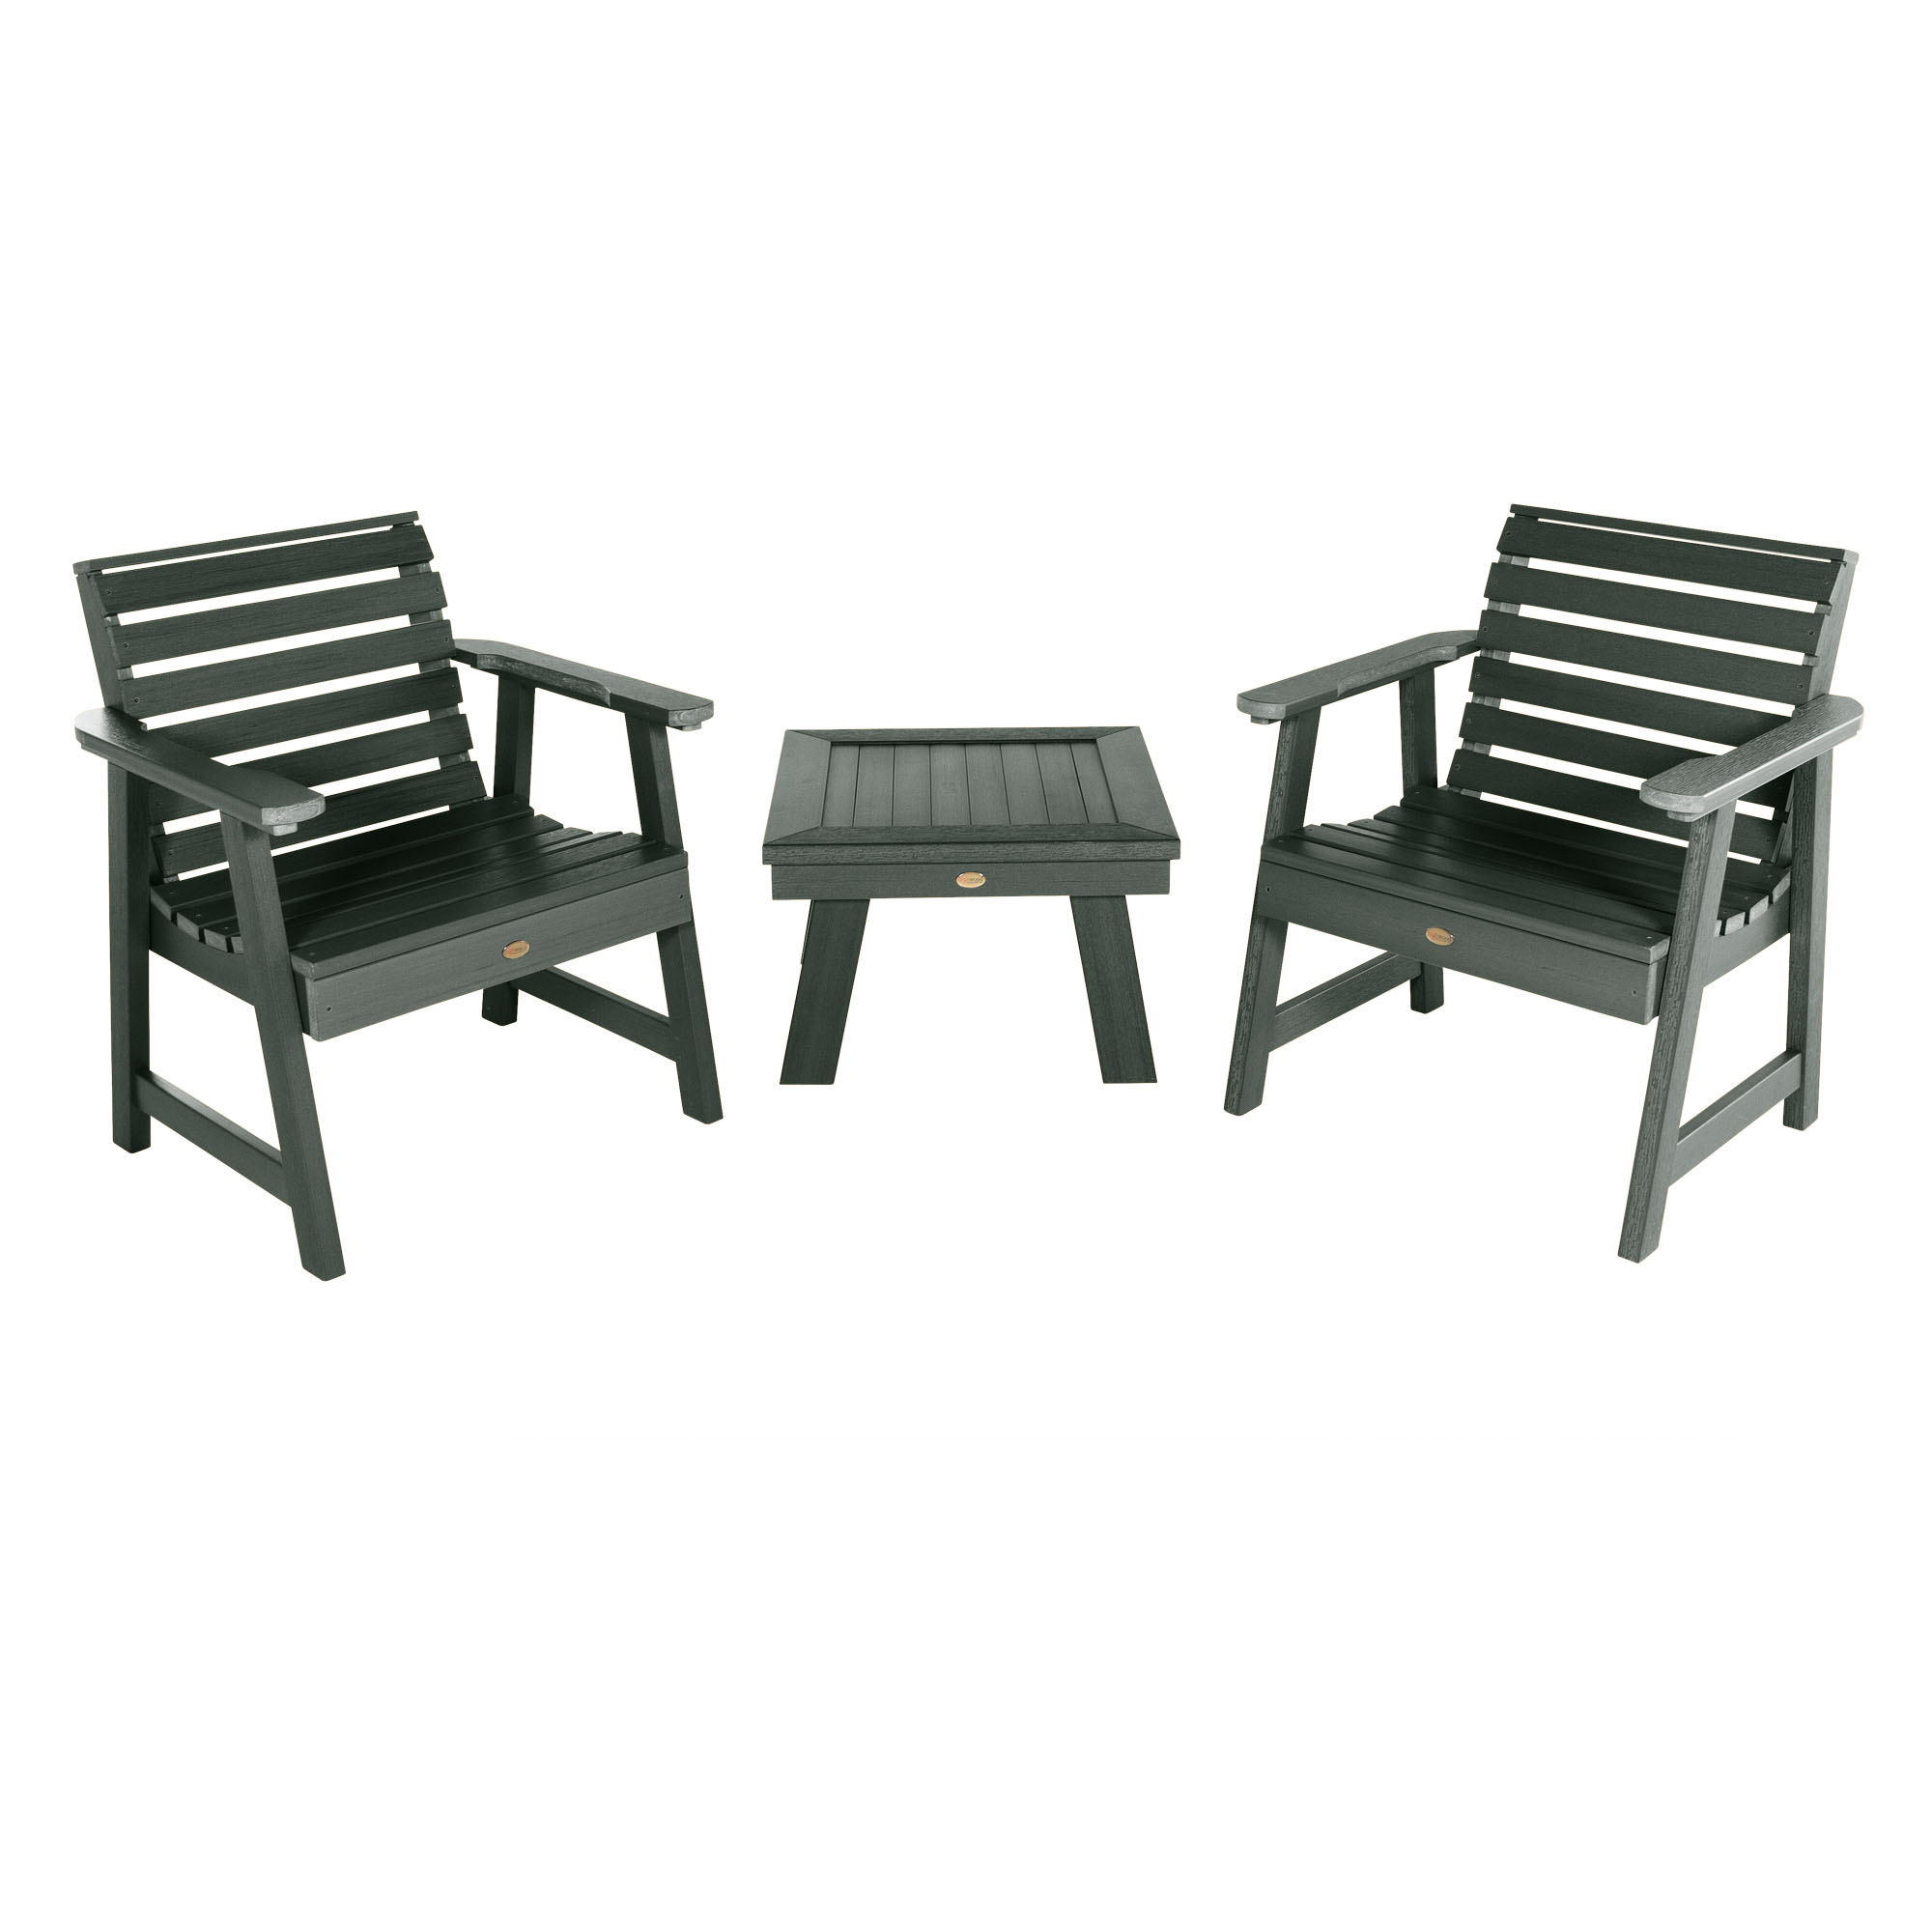 Highwood USA 2 Weatherly Garden Chairs with 1 Square Side Table Patio Furniture Sets - image 1 of 10